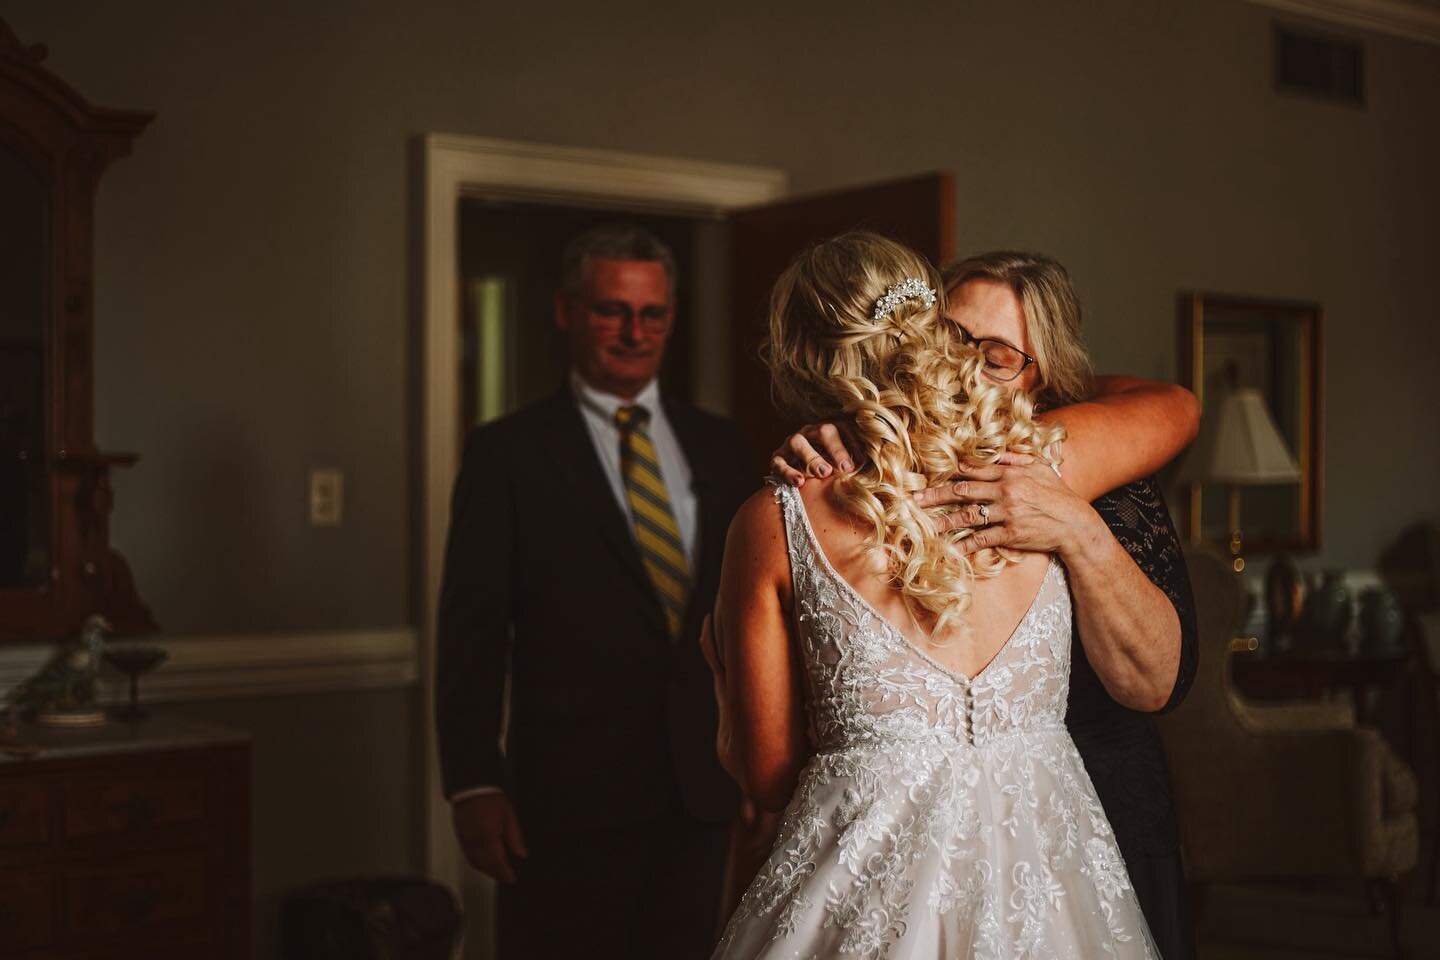 Wedding day moments 🤗

Venue: First Presbyterian + @pinewoodcountryclubnc 
Wedding Planner: @momma_pig + Nancy Yow
Videography: @tobaccoroadfilmco 
DJ: Barry Yow 
Florist: Burge Flower Shop
Catering: Pinewood Country Club
Cake: @deliciousgreensboro 